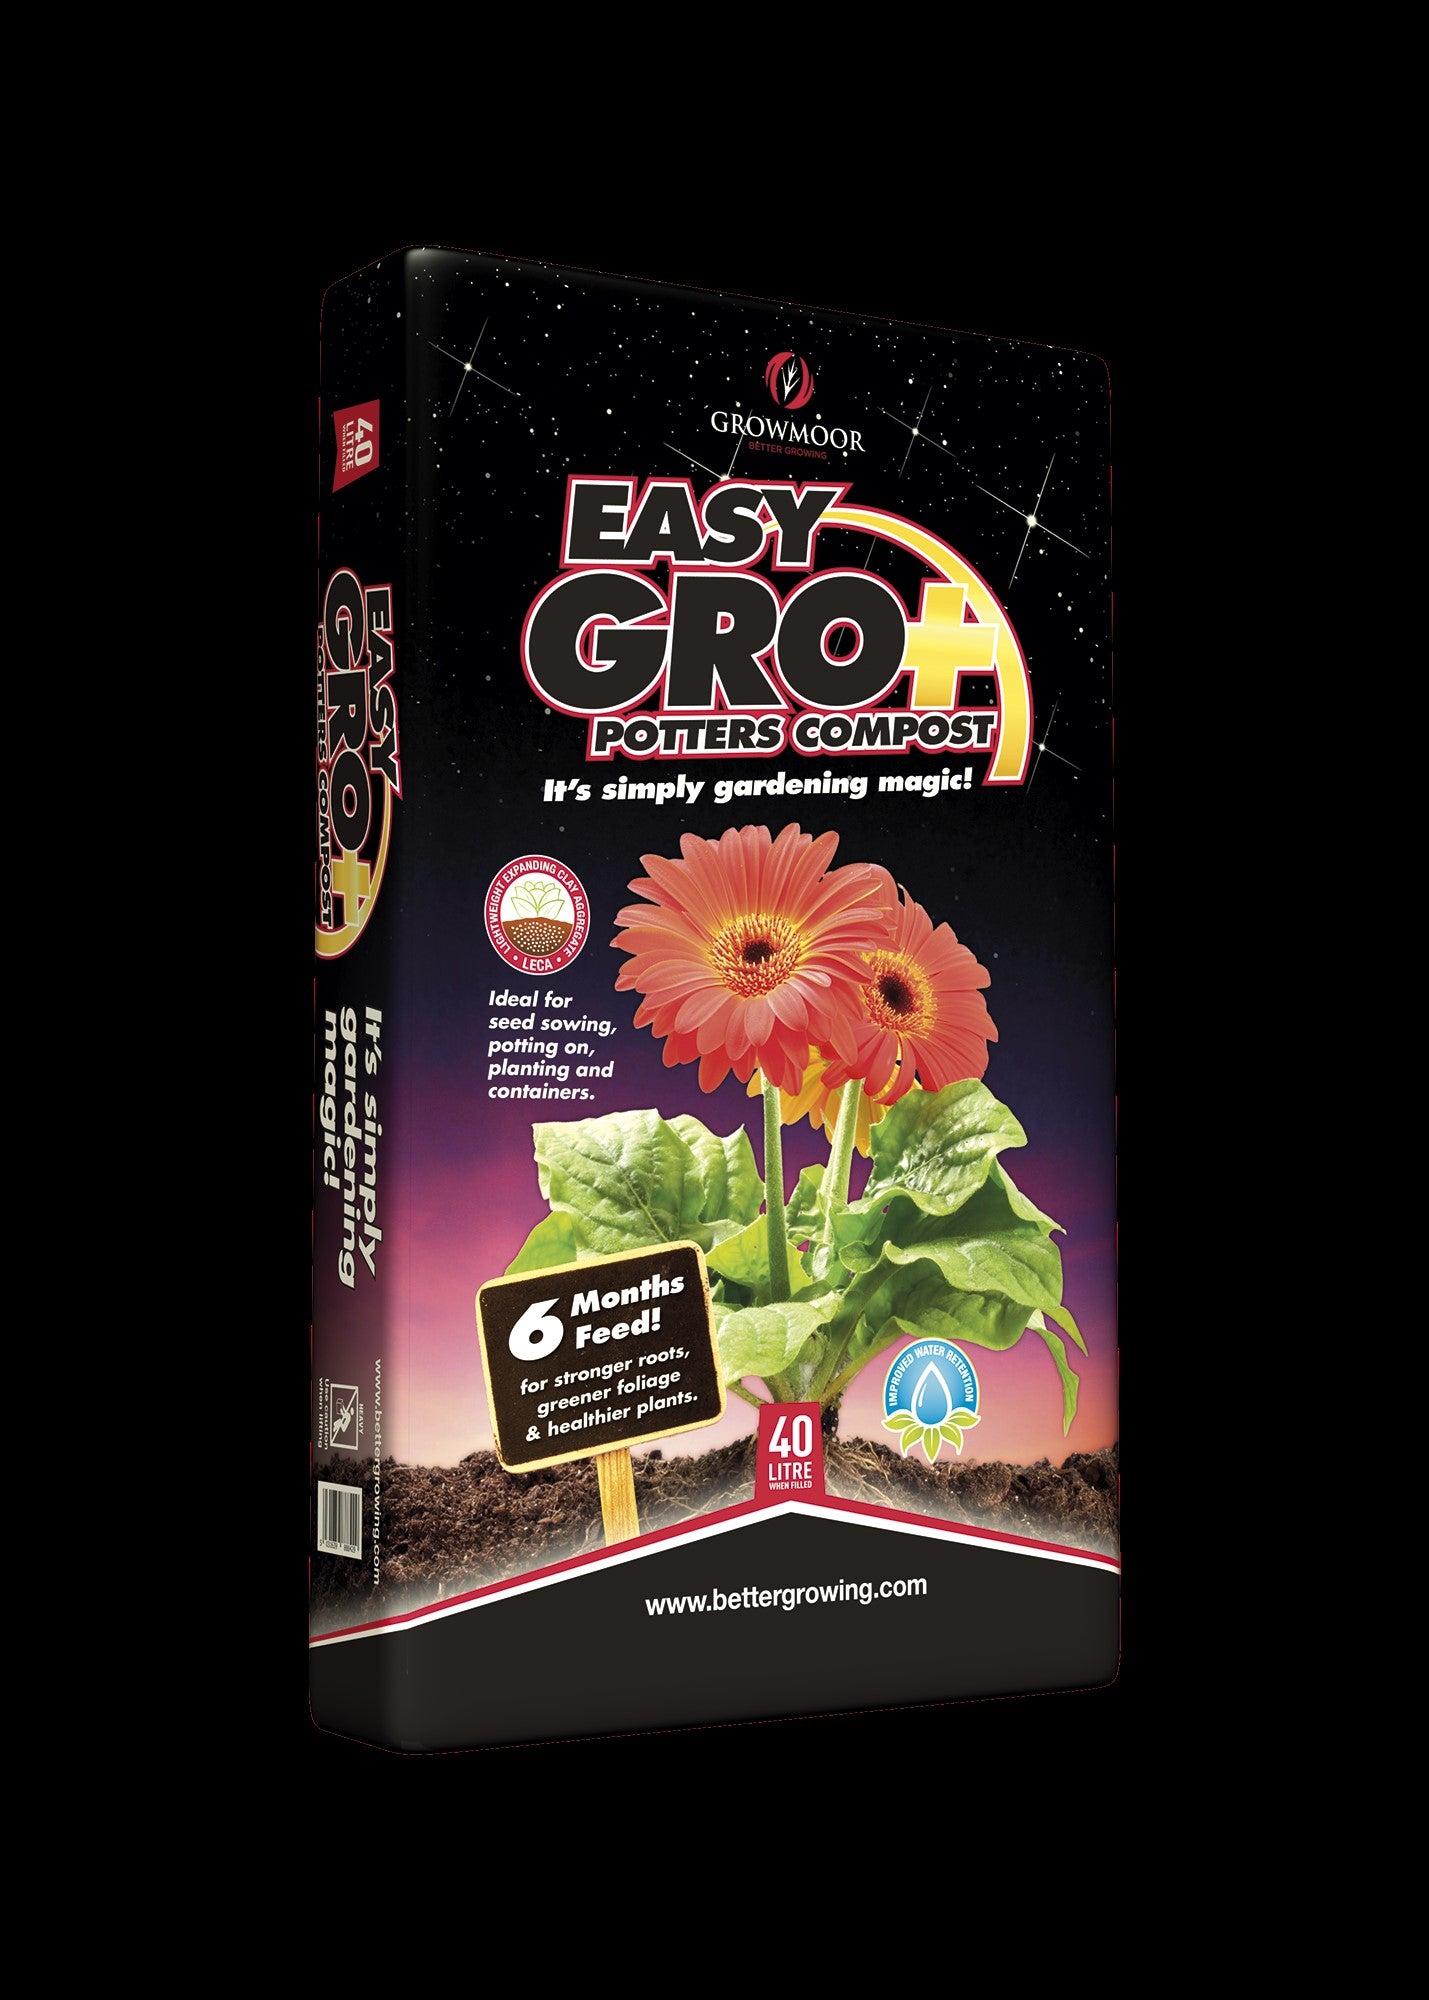 EasyGro+ Potters Compost 40L (4 MONTHS FEED) (MULTIBUY OFFERS AVAILABLE)